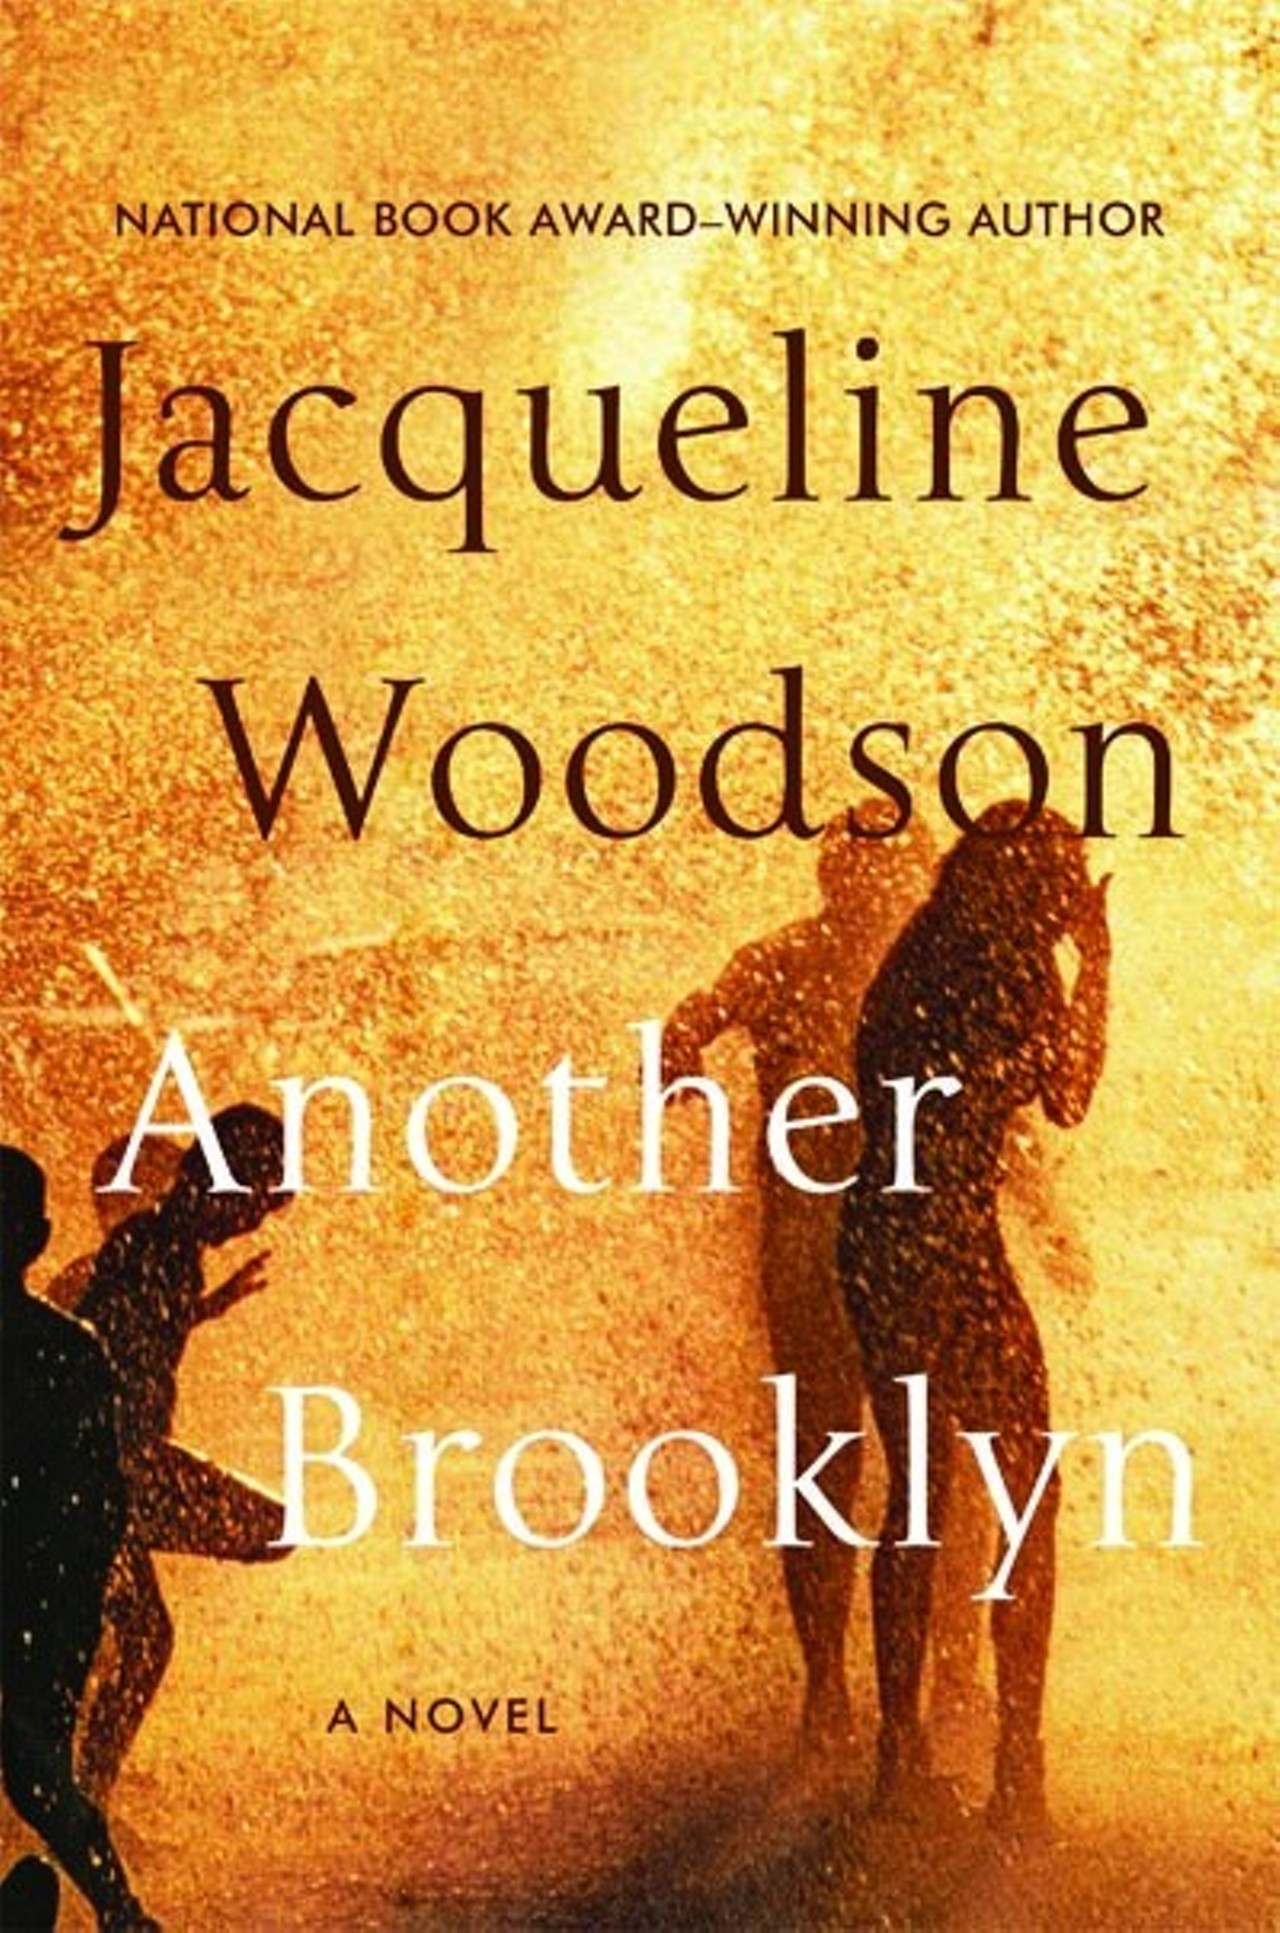 Another Brooklyn by Jacqueline Woodson -
In this short, nostalgic novel, a finalist for the National Book Award, Woodson poetically writes about four young African-American girls growing up in poverty in Brooklyn and how they deal with friendship, love, death, adolescence and separation. Woodson's lyrical prose is a perfect fit for the dreamlike nature of the tale.